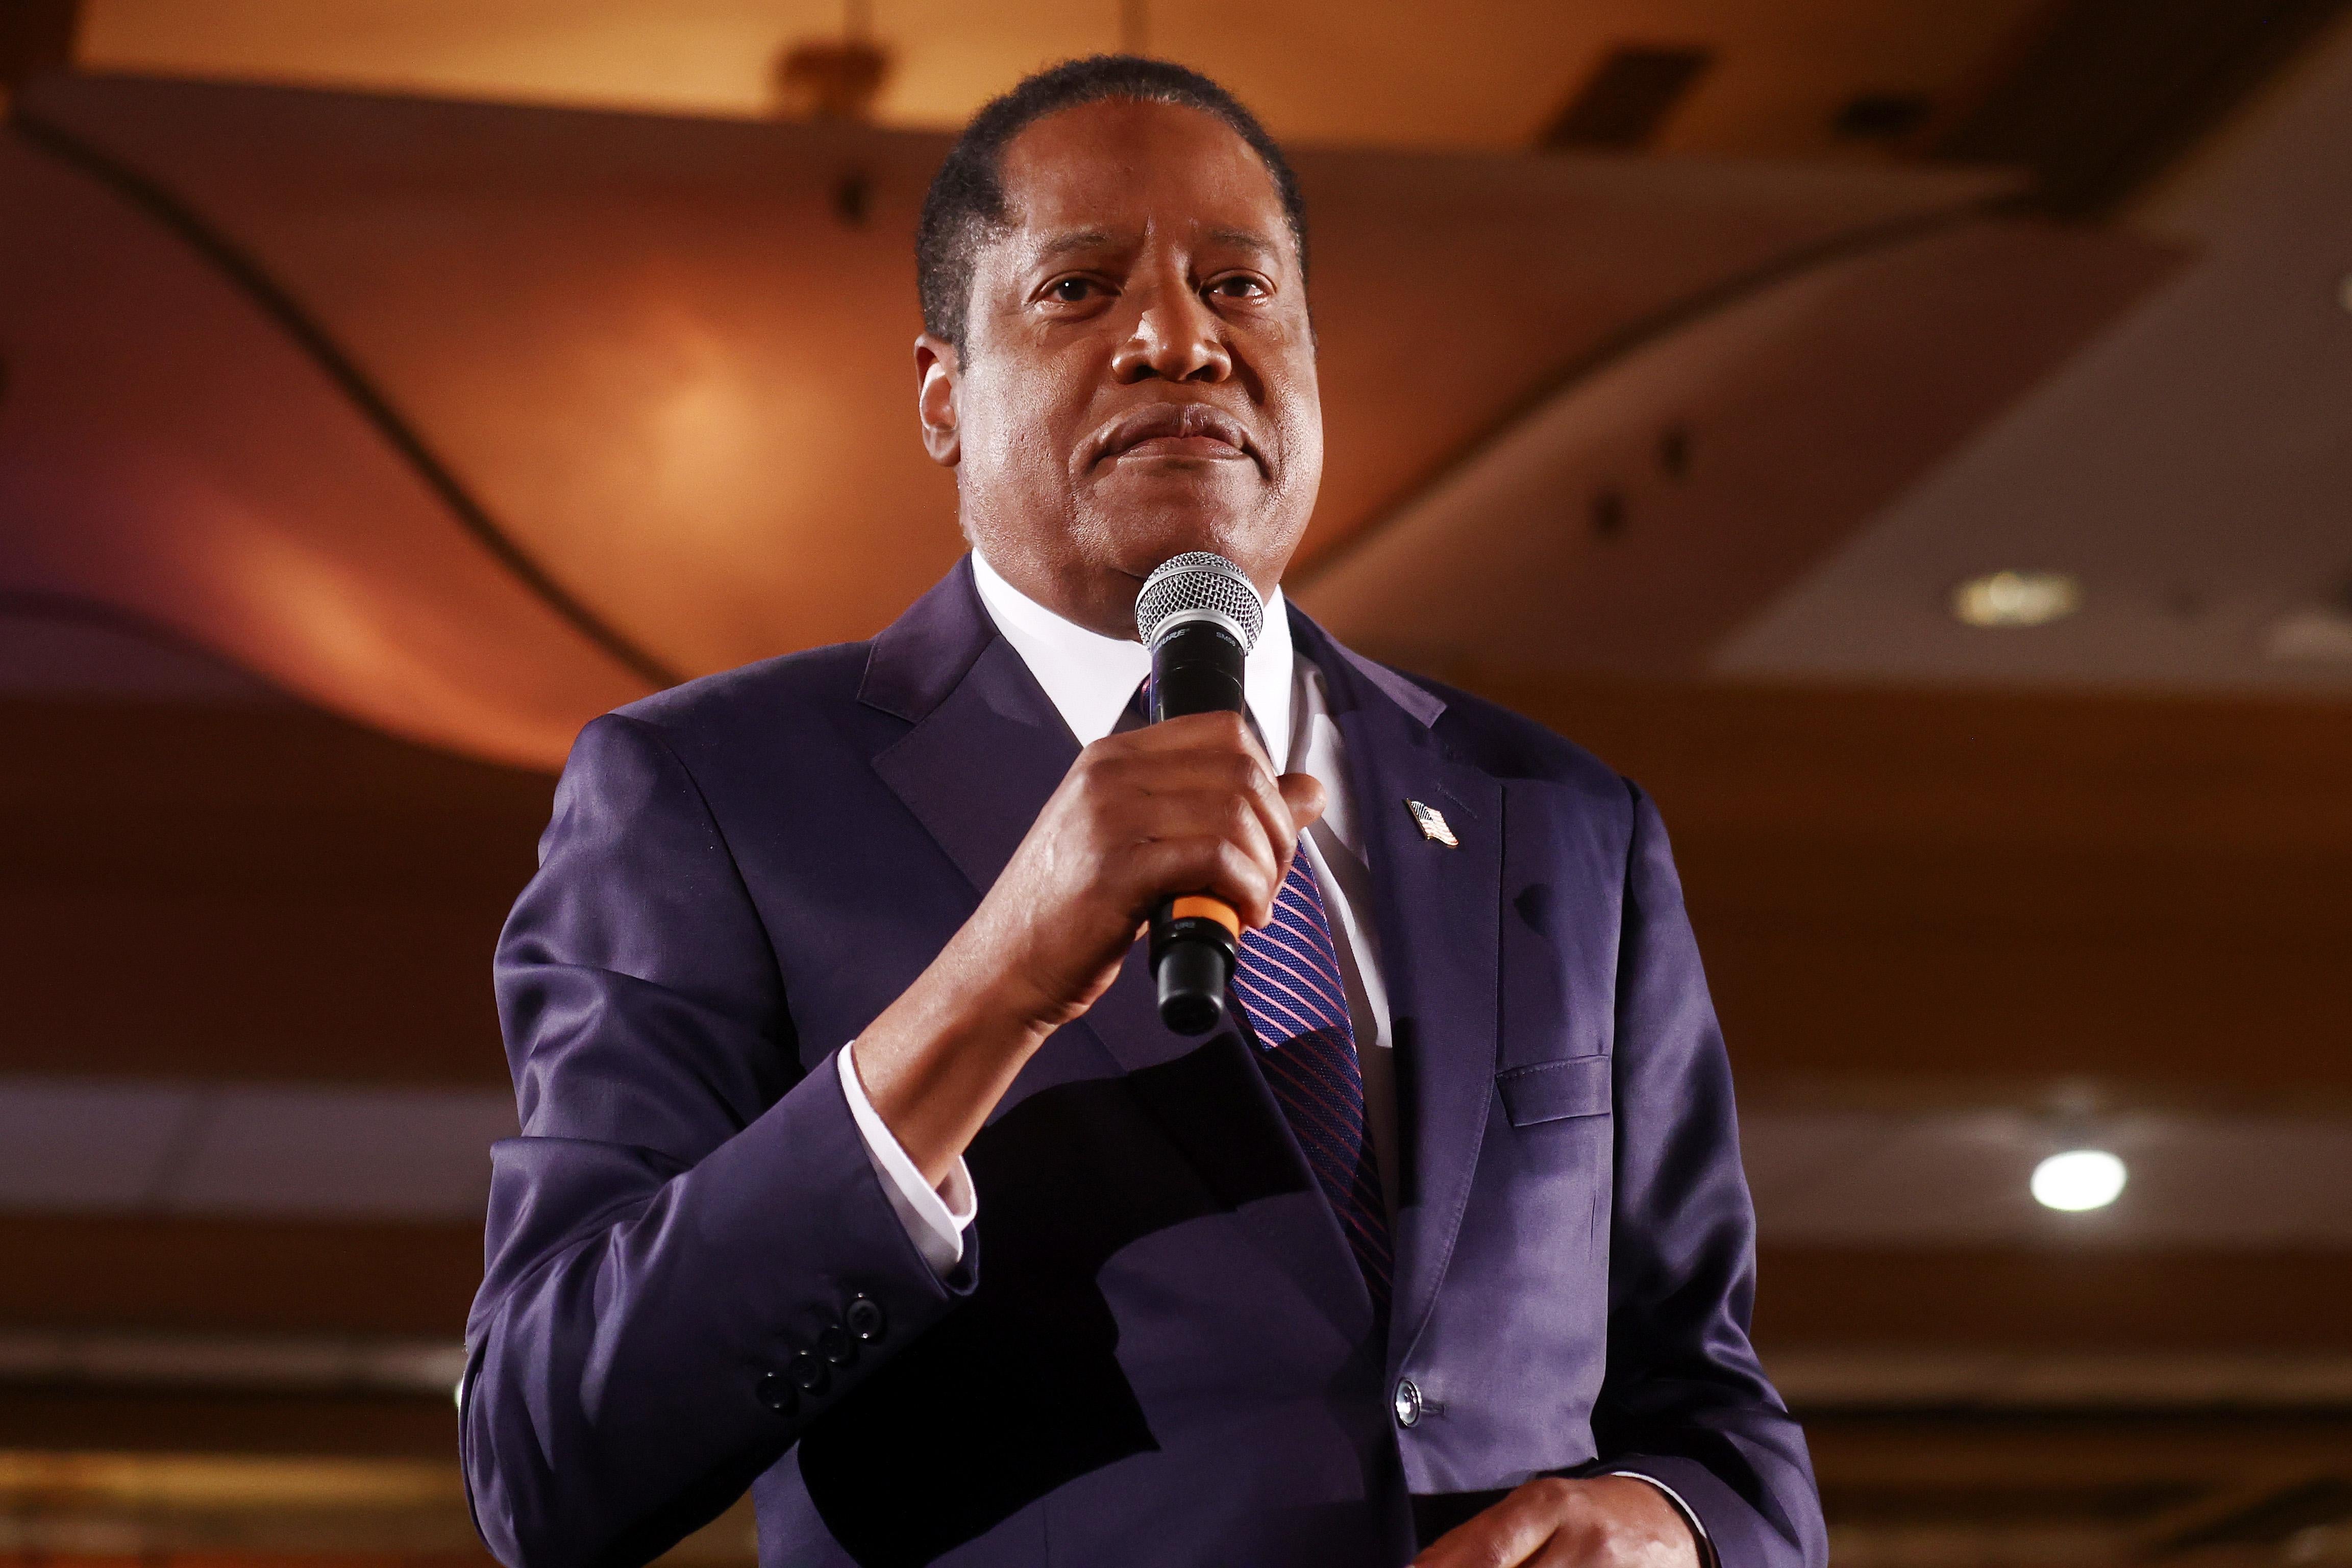 Gubernatorial recall candidate Larry Elder speaks to supporters at an election night event on September 14, 2021 in Costa Mesa, California. 